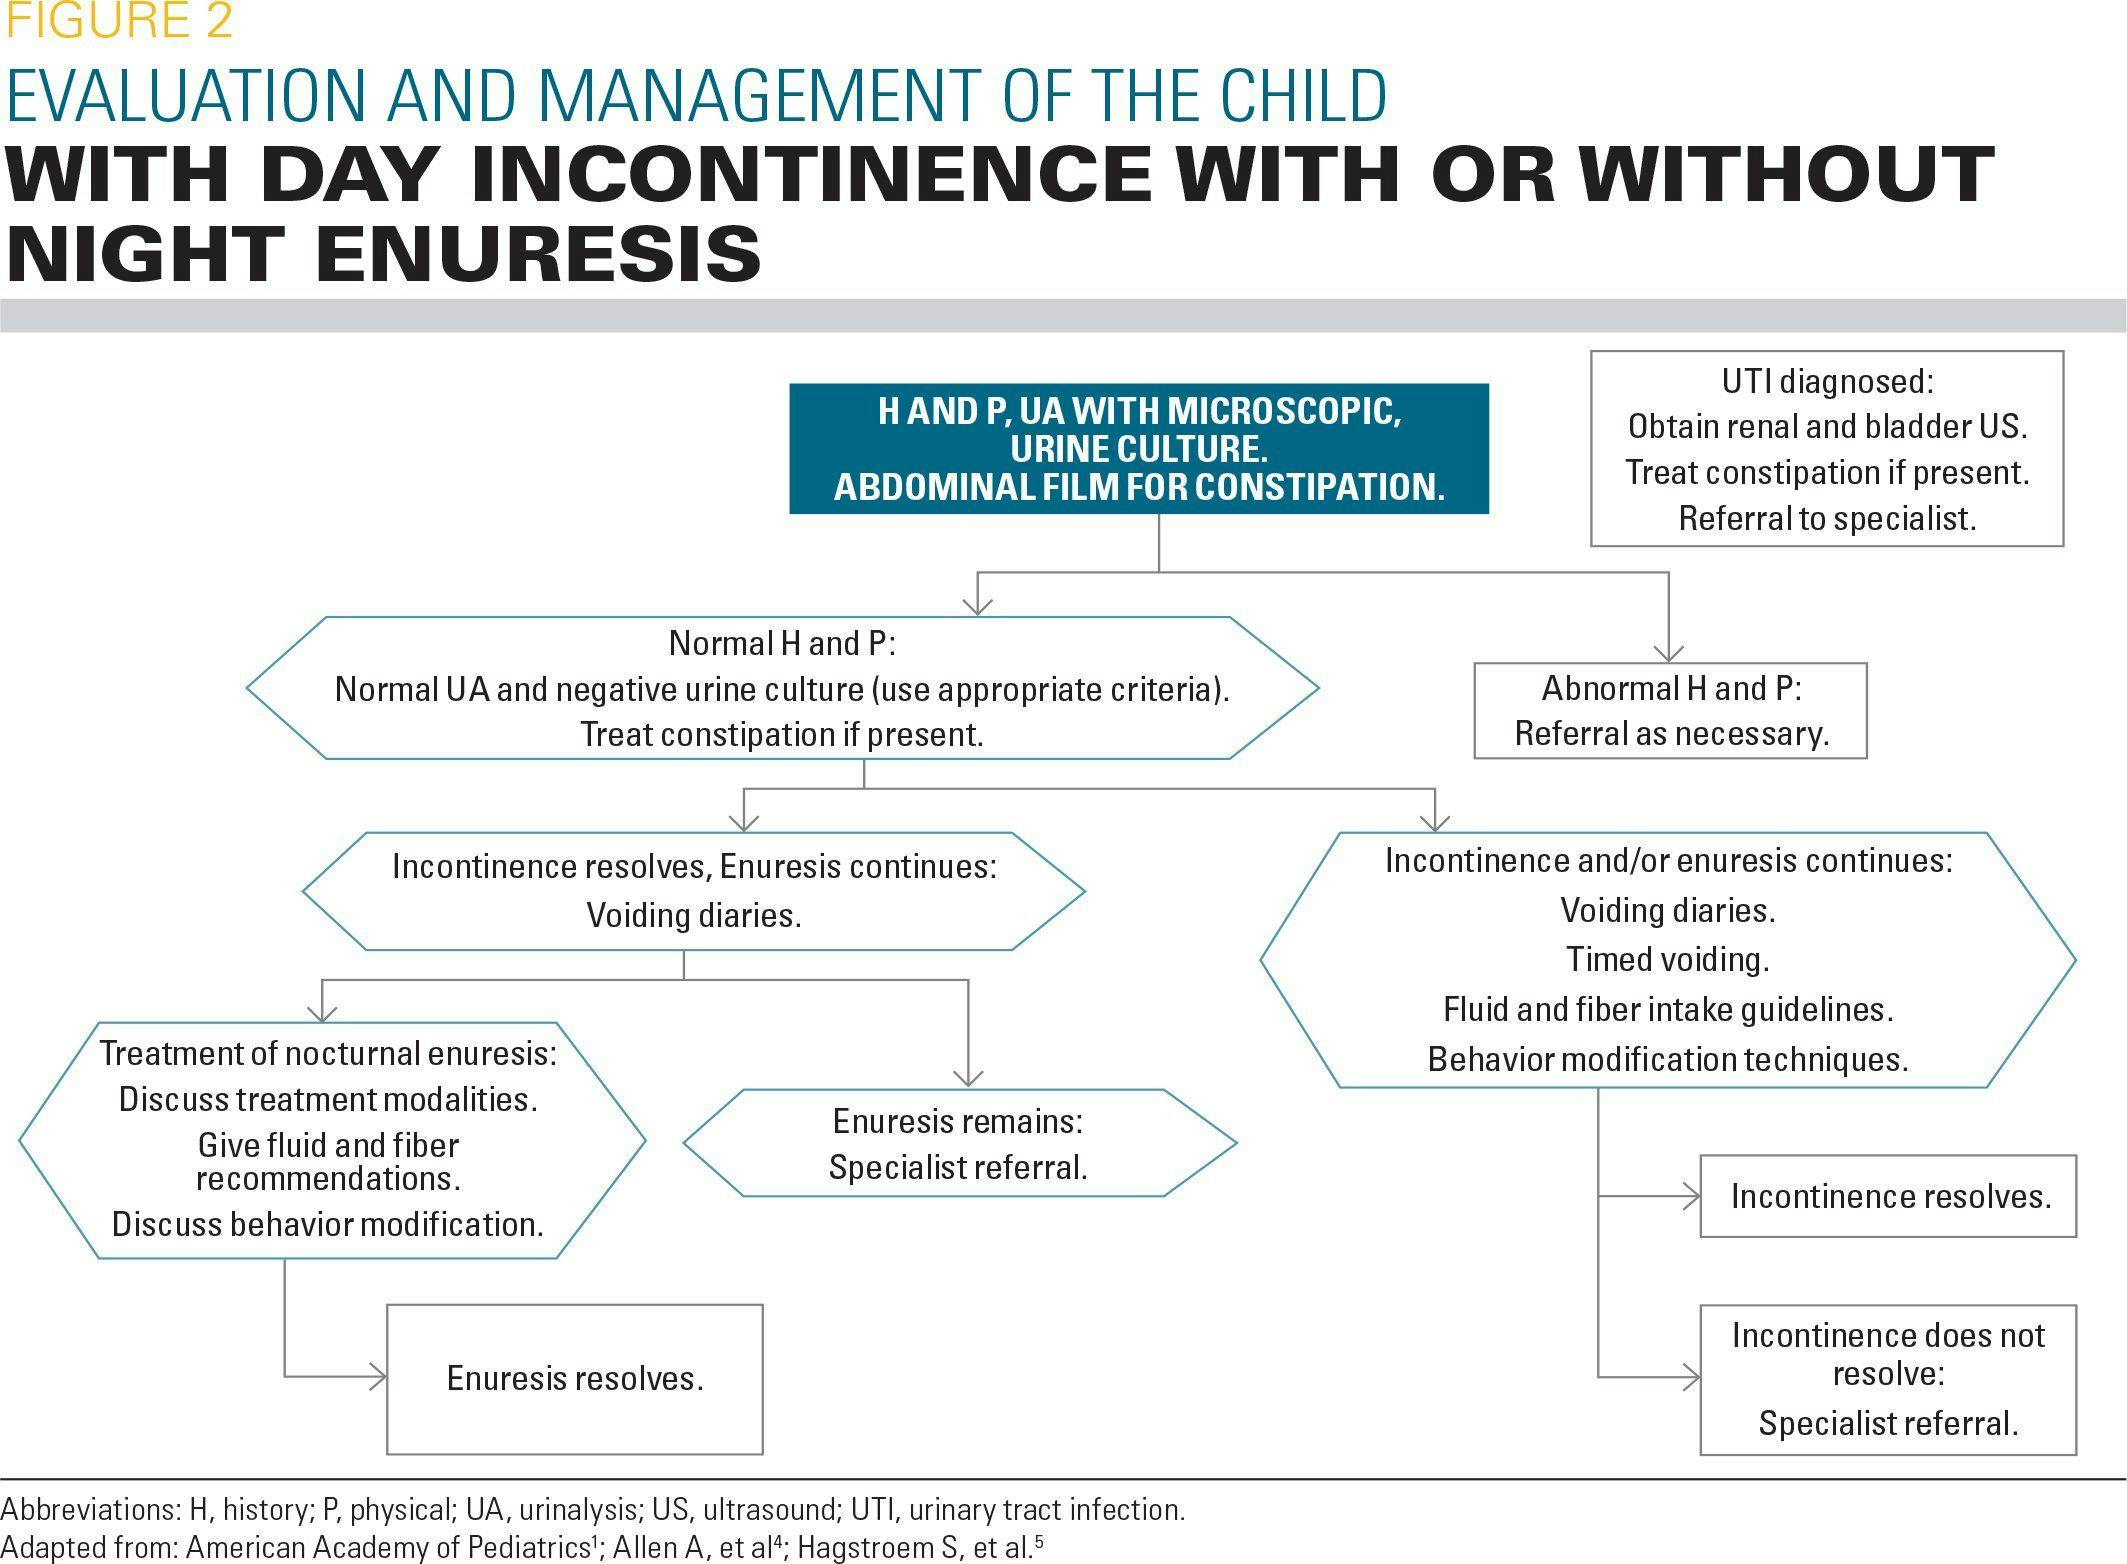 Evaluation and management of the child with day incontinence with or without night enuresis